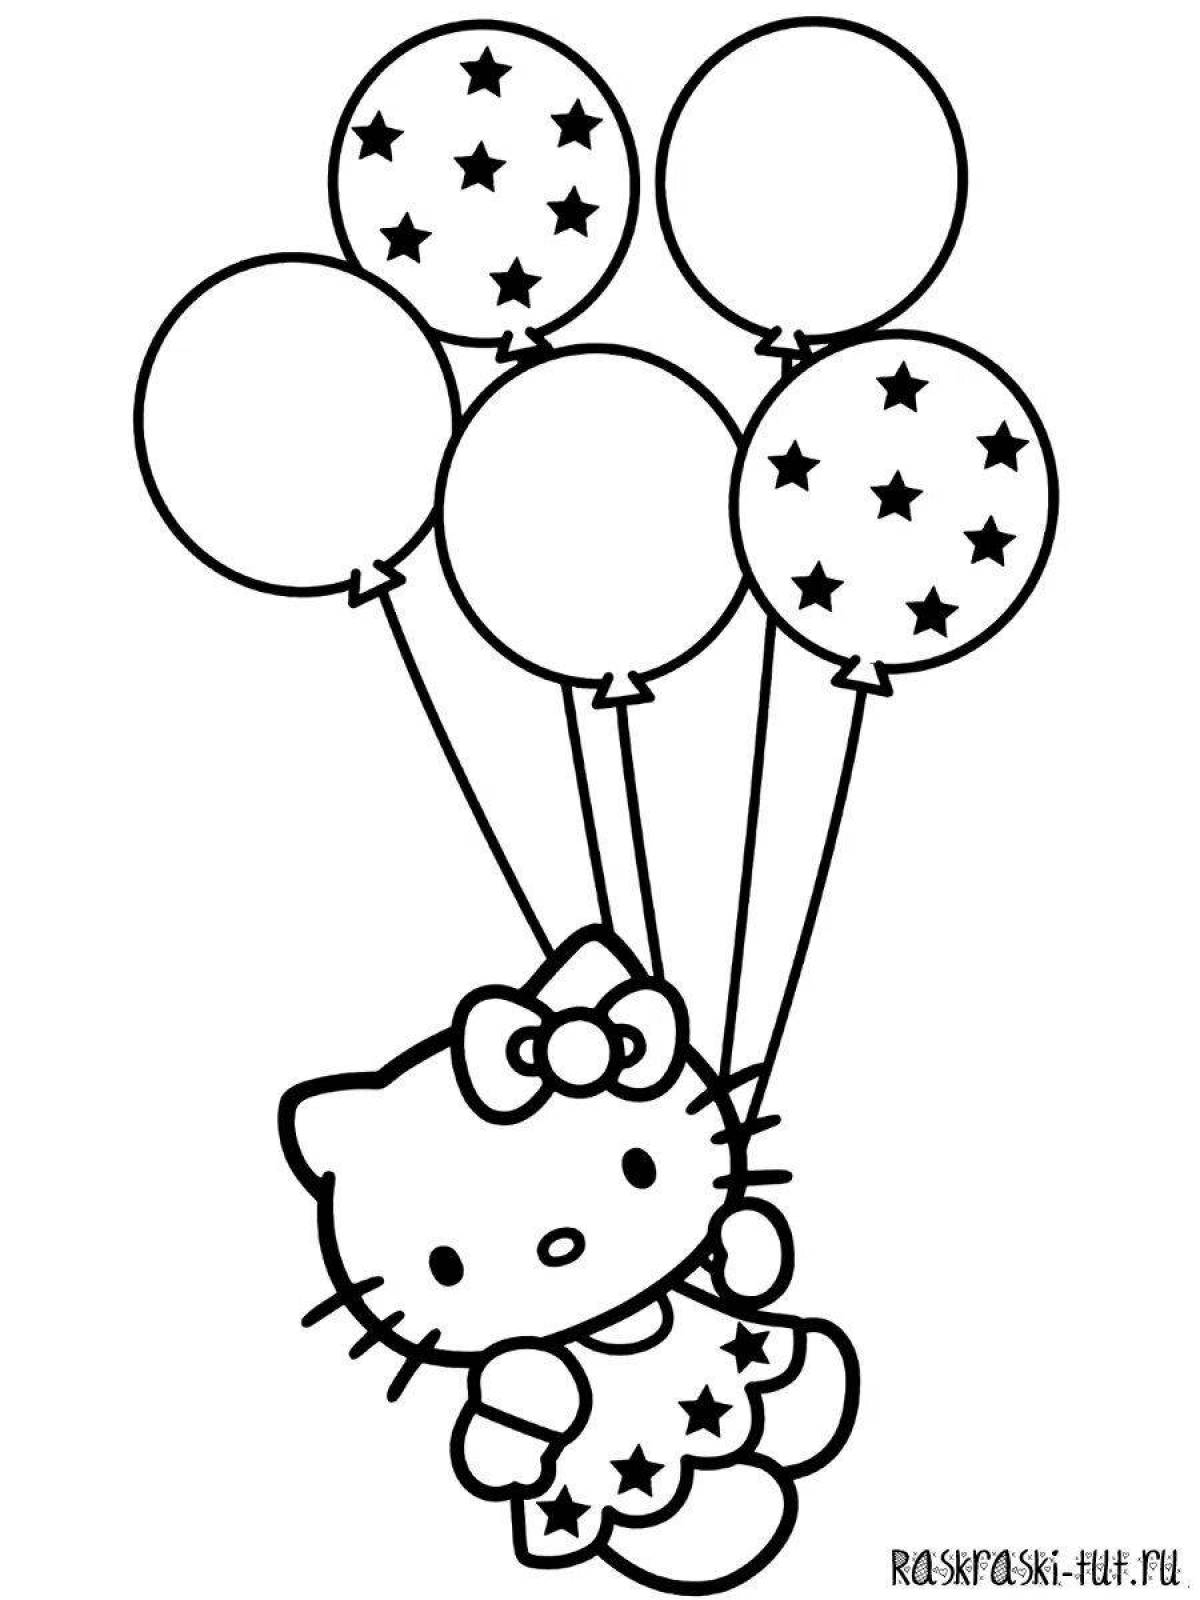 Fairy balloons coloring for children 2-3 years old